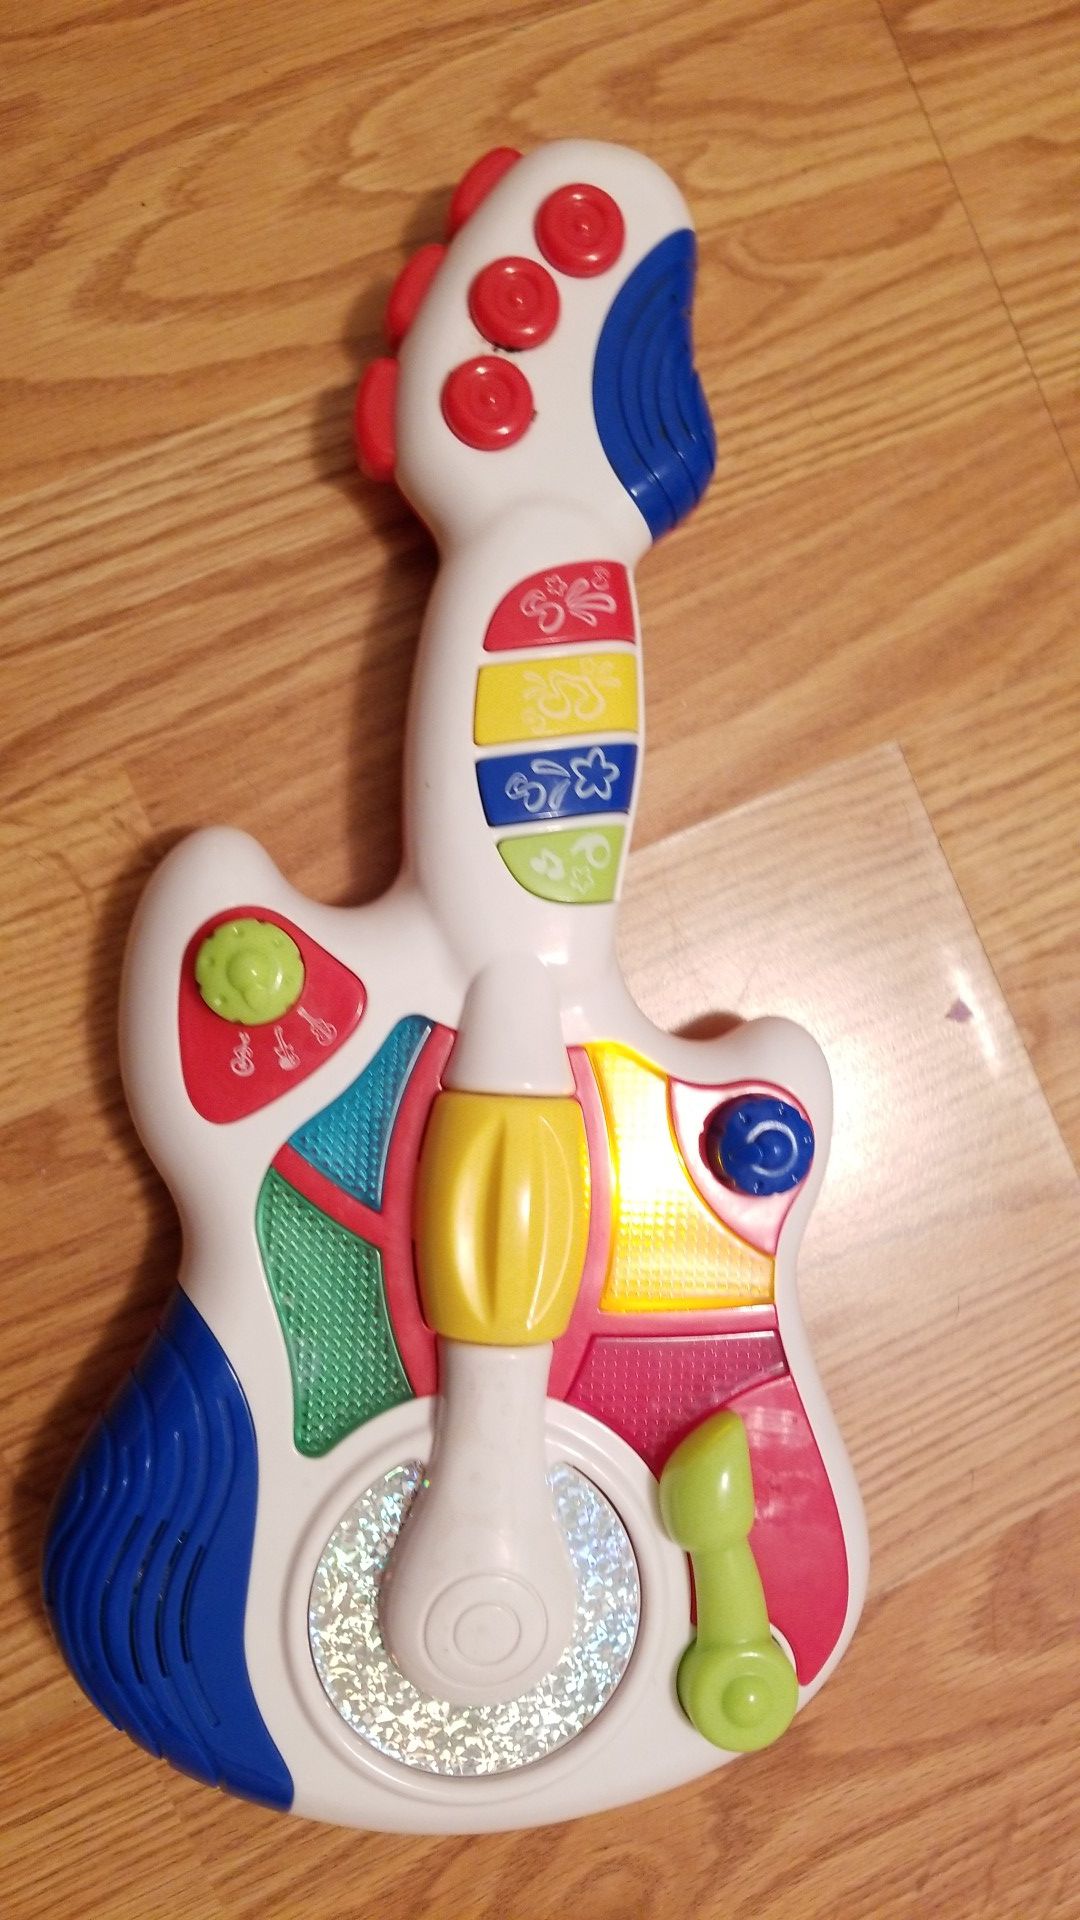 Toy light up music playing guitar for baby